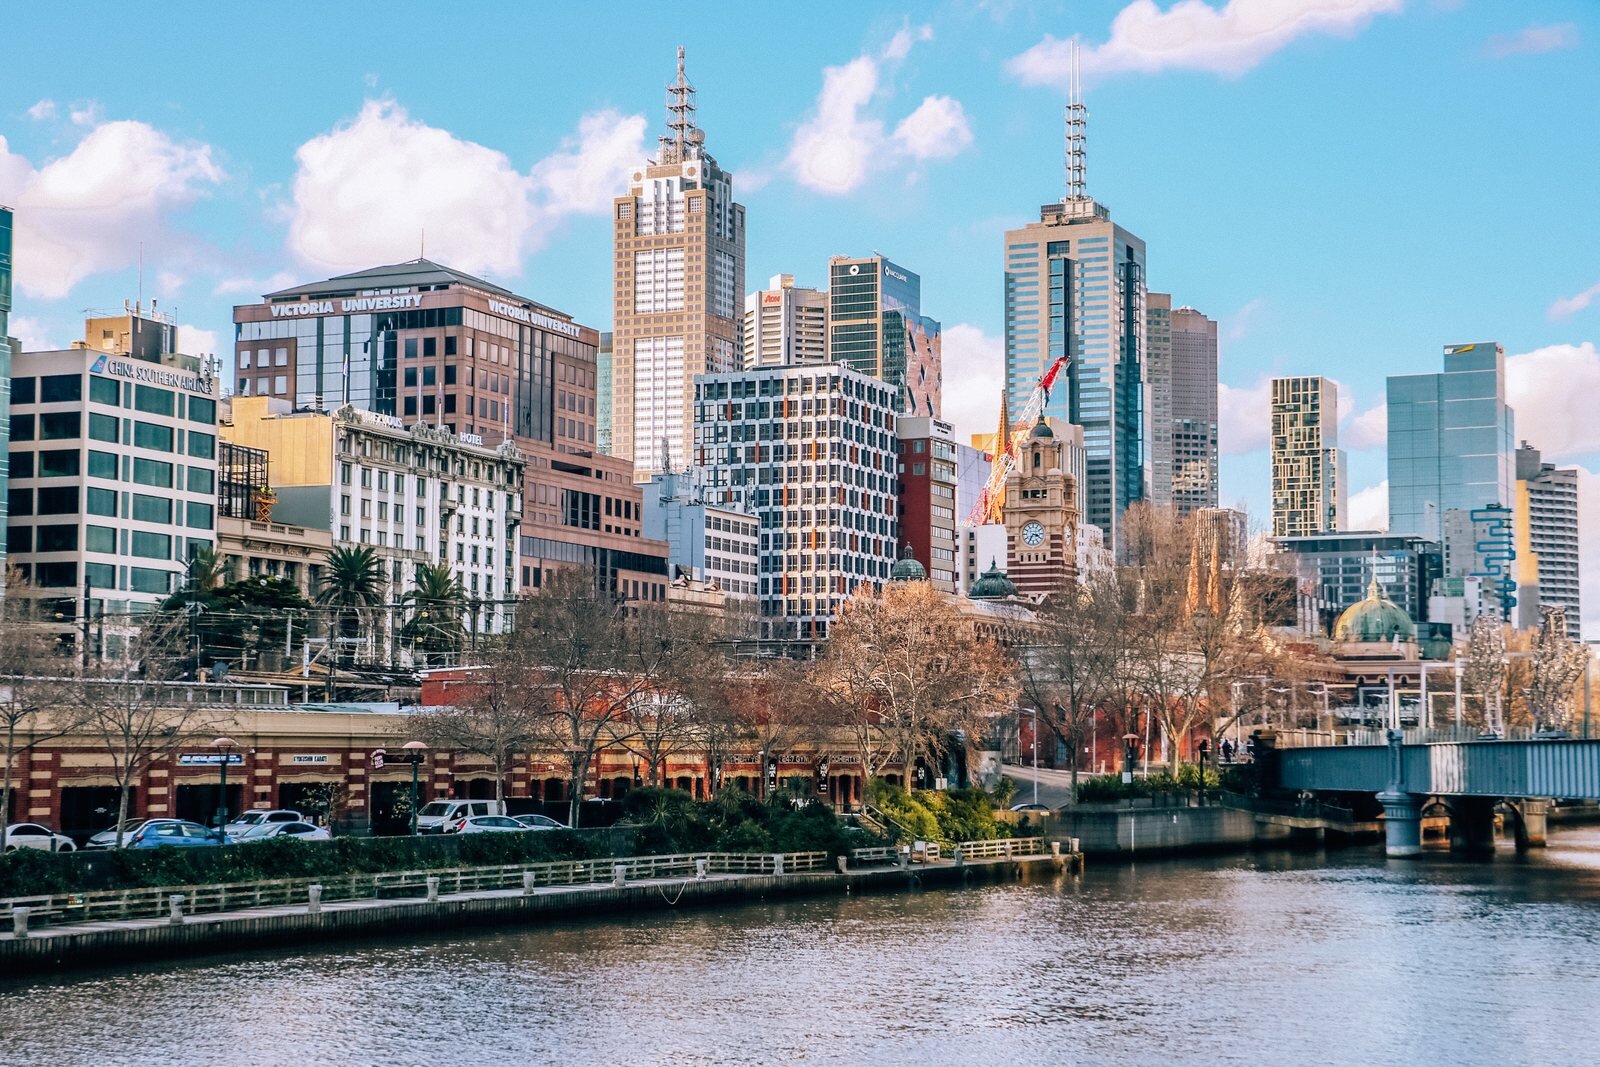 Melbourne CBD from the Yarra River